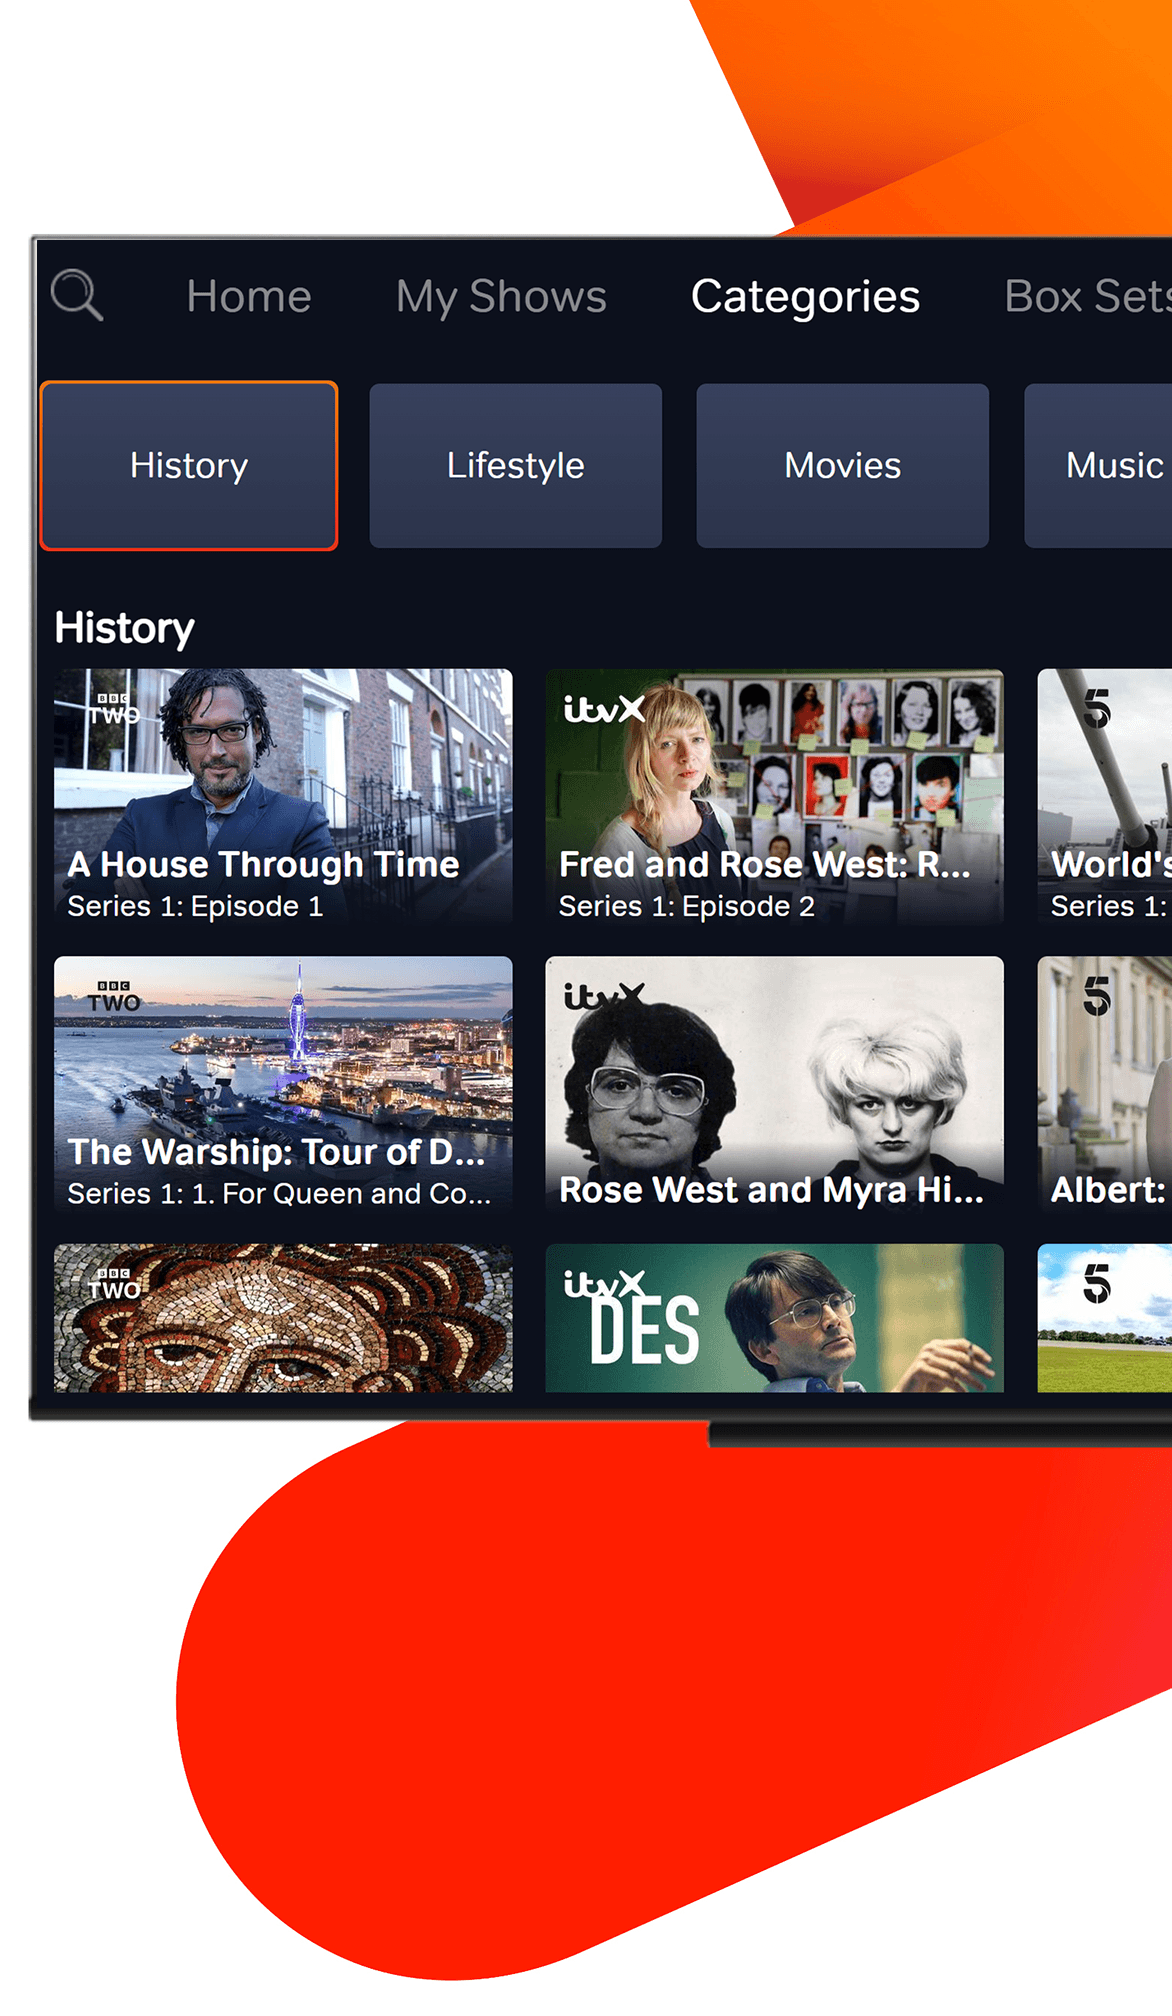 Explore freeview play - history